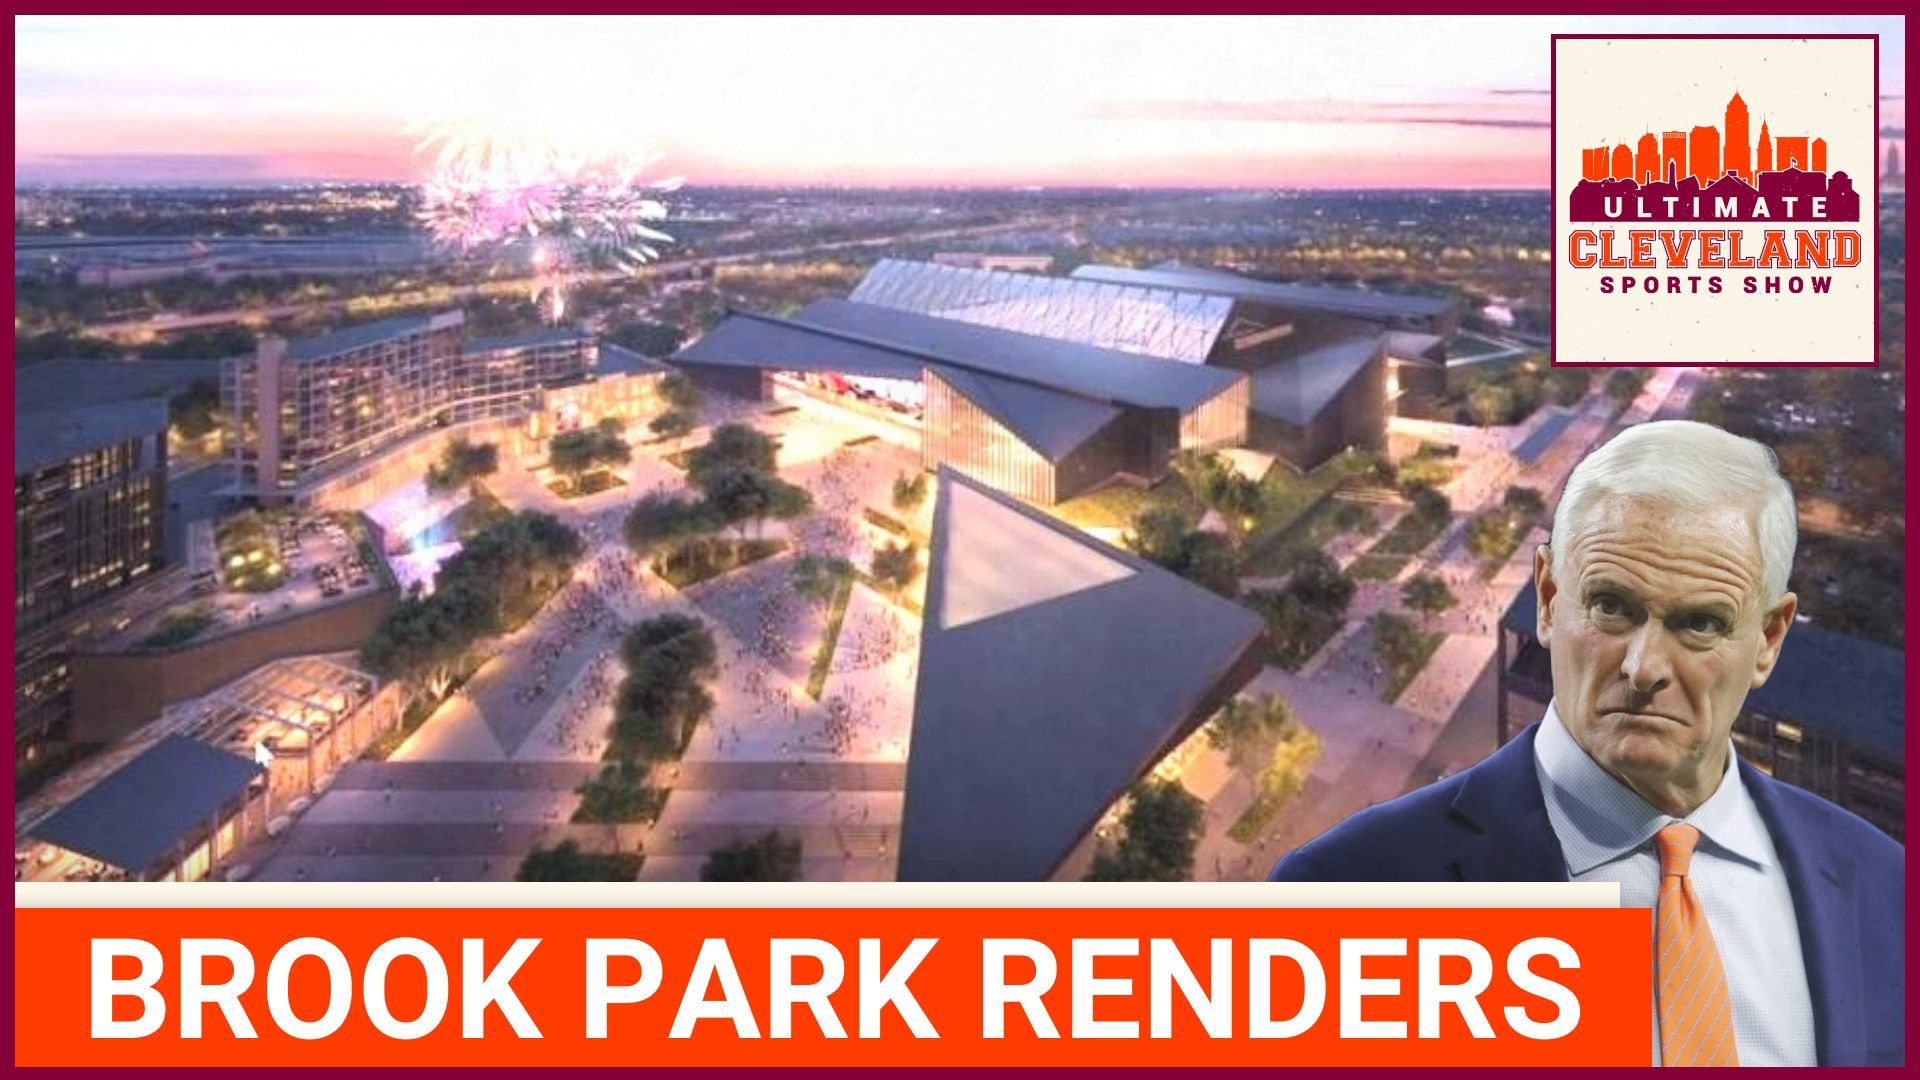 A new render of the possible Cleveland Browns stadium has been leaked. How does this change the fanbase's feelings about a Brook Park stadium?